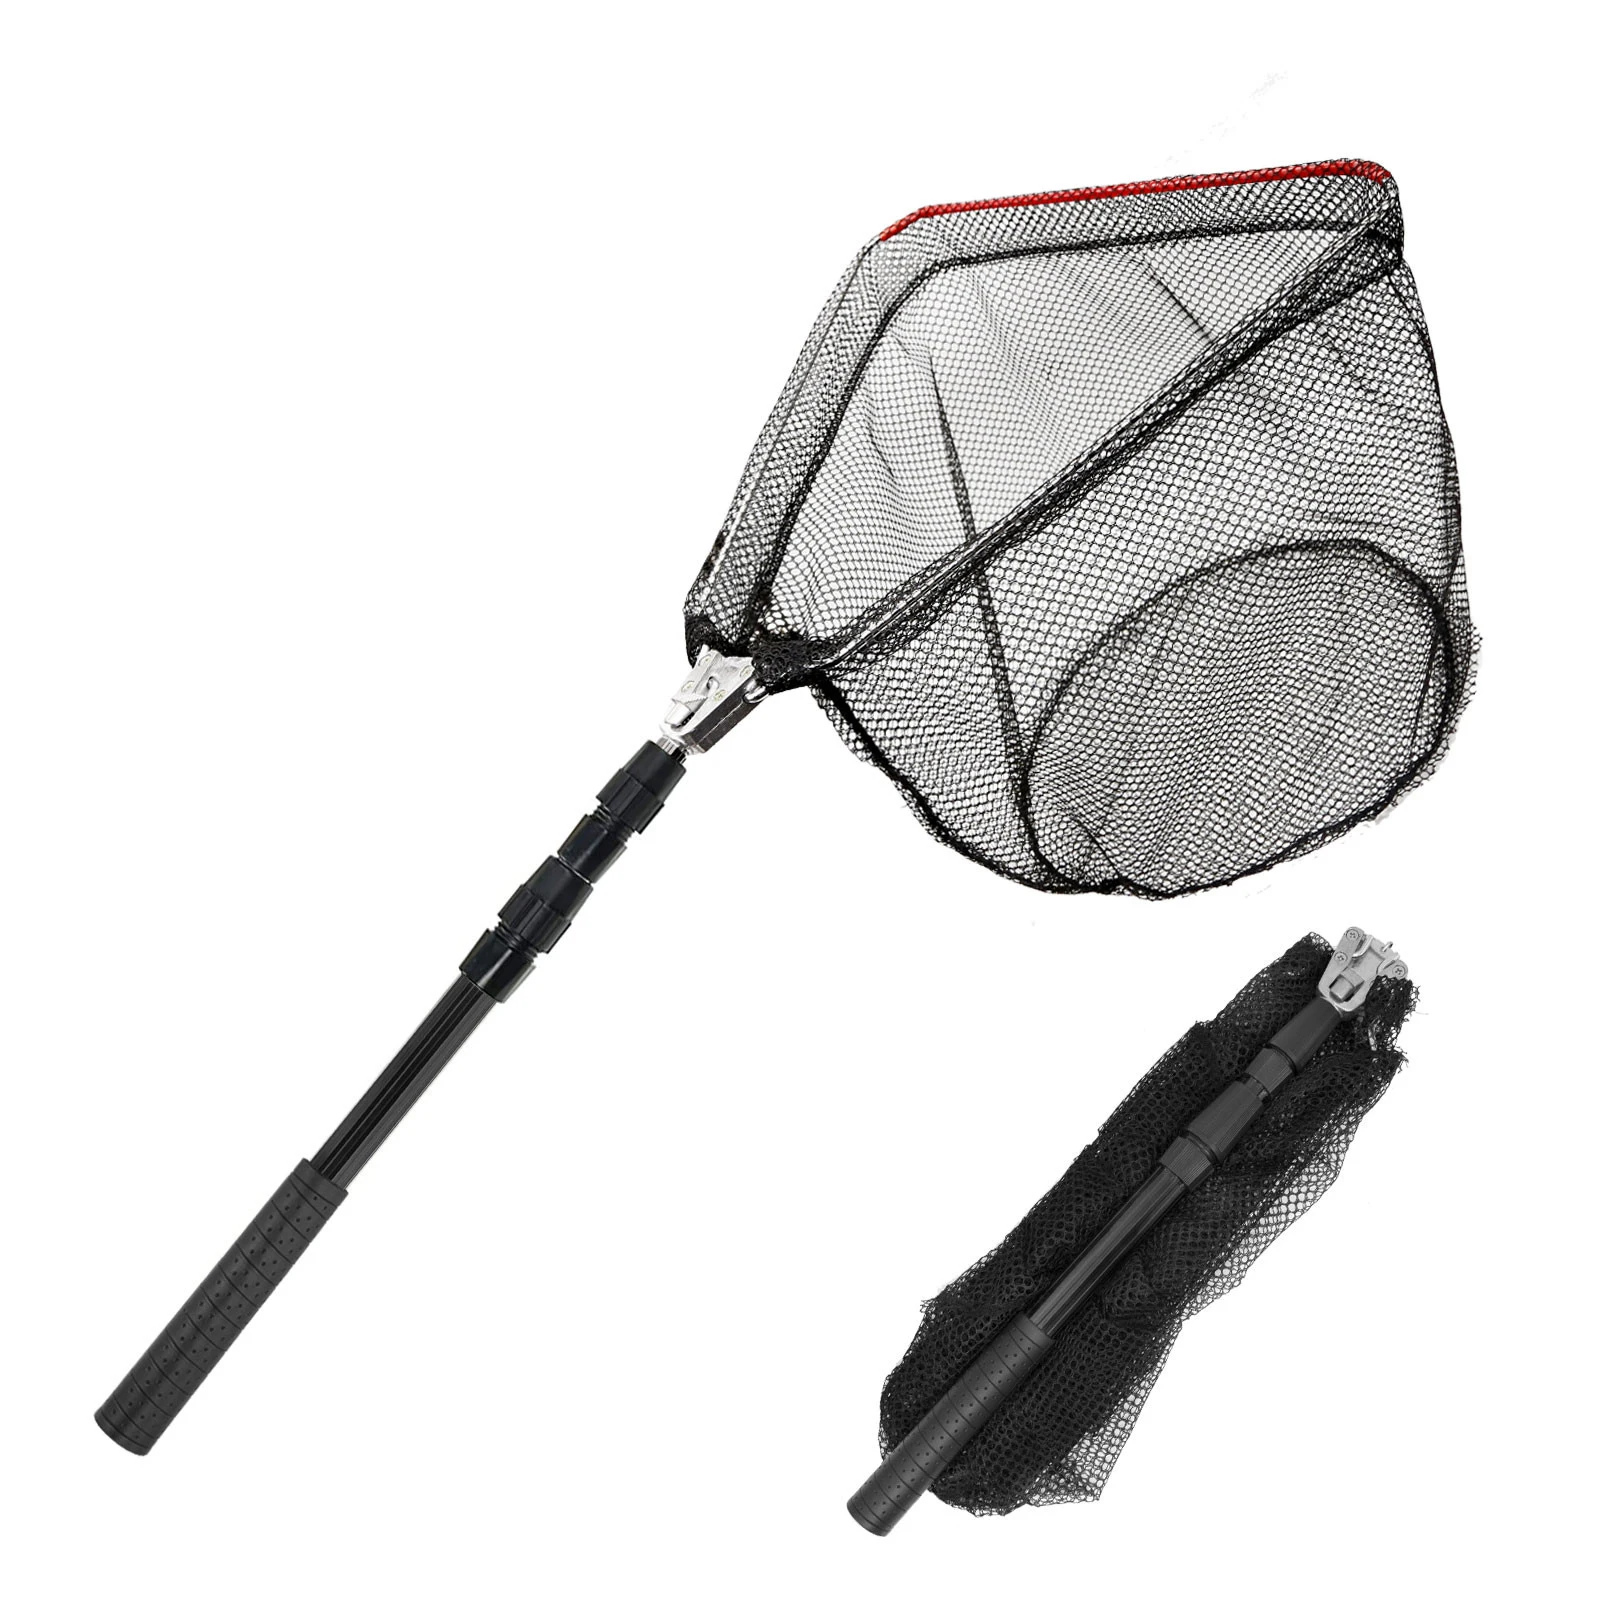 SANLIKE 129cm Folding Fishing Net Collapsible Telescopic Sturdy Rubber Coated Landing Handle Pole Fishing Tool Accessories